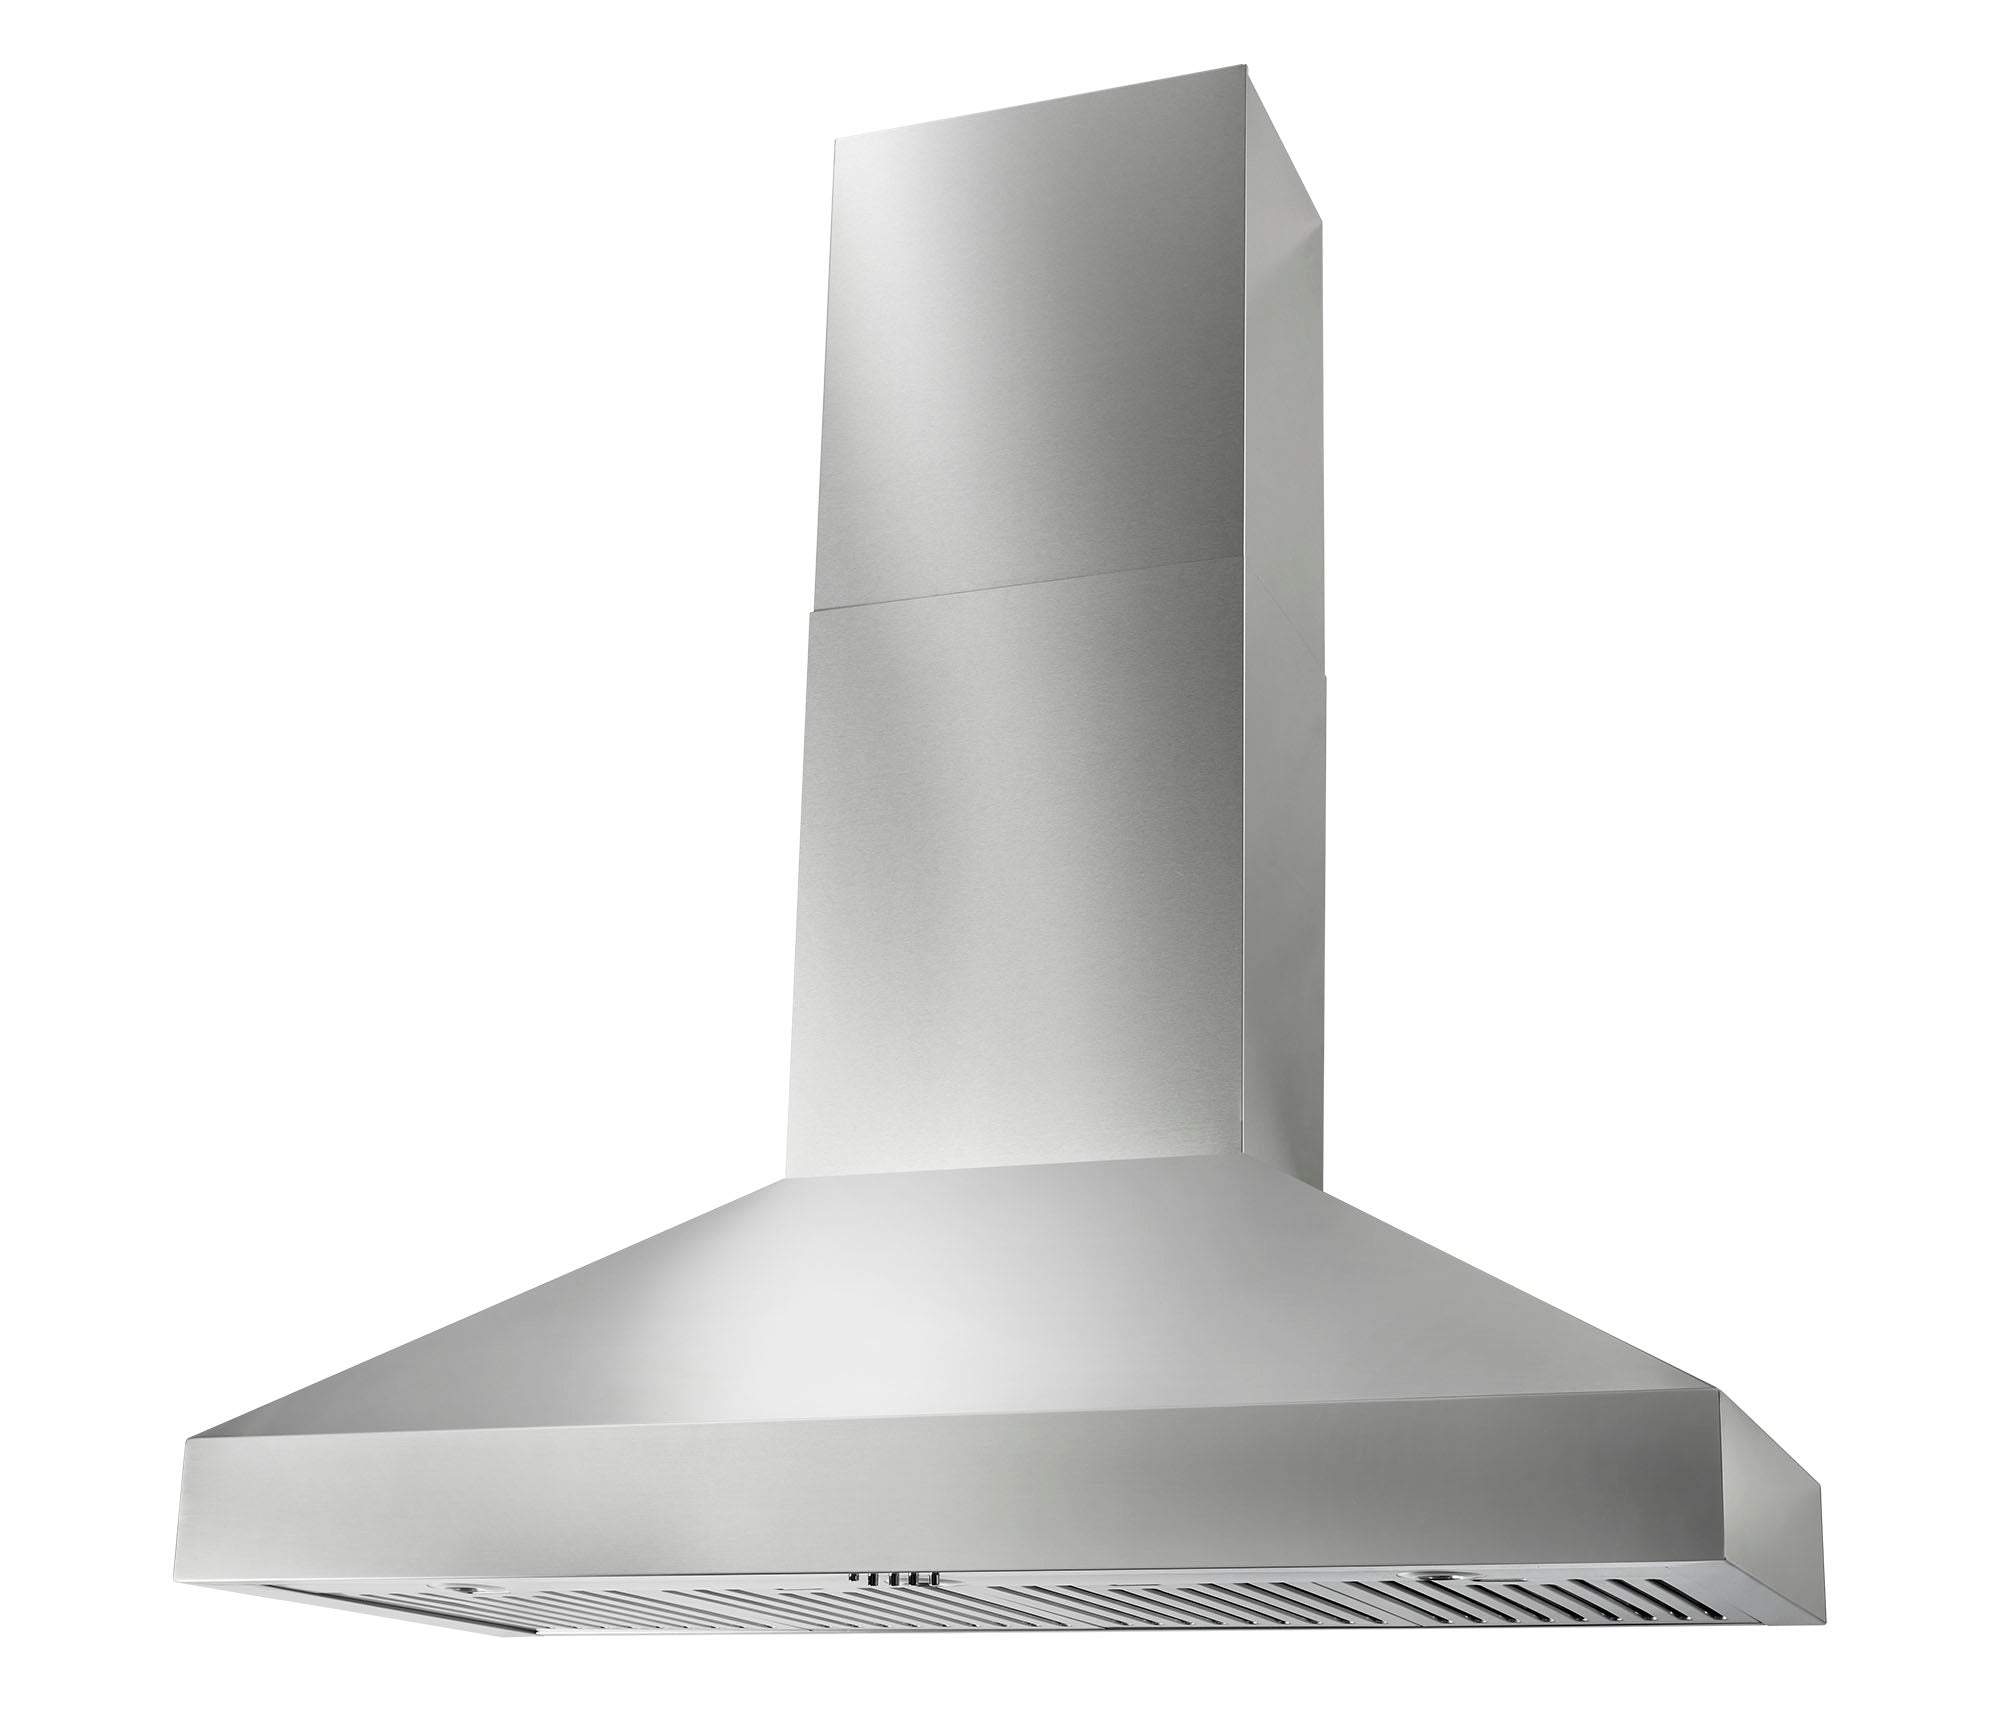 30 Inch Professional Range Hood, 11 Inches Tall in Stainless Steel